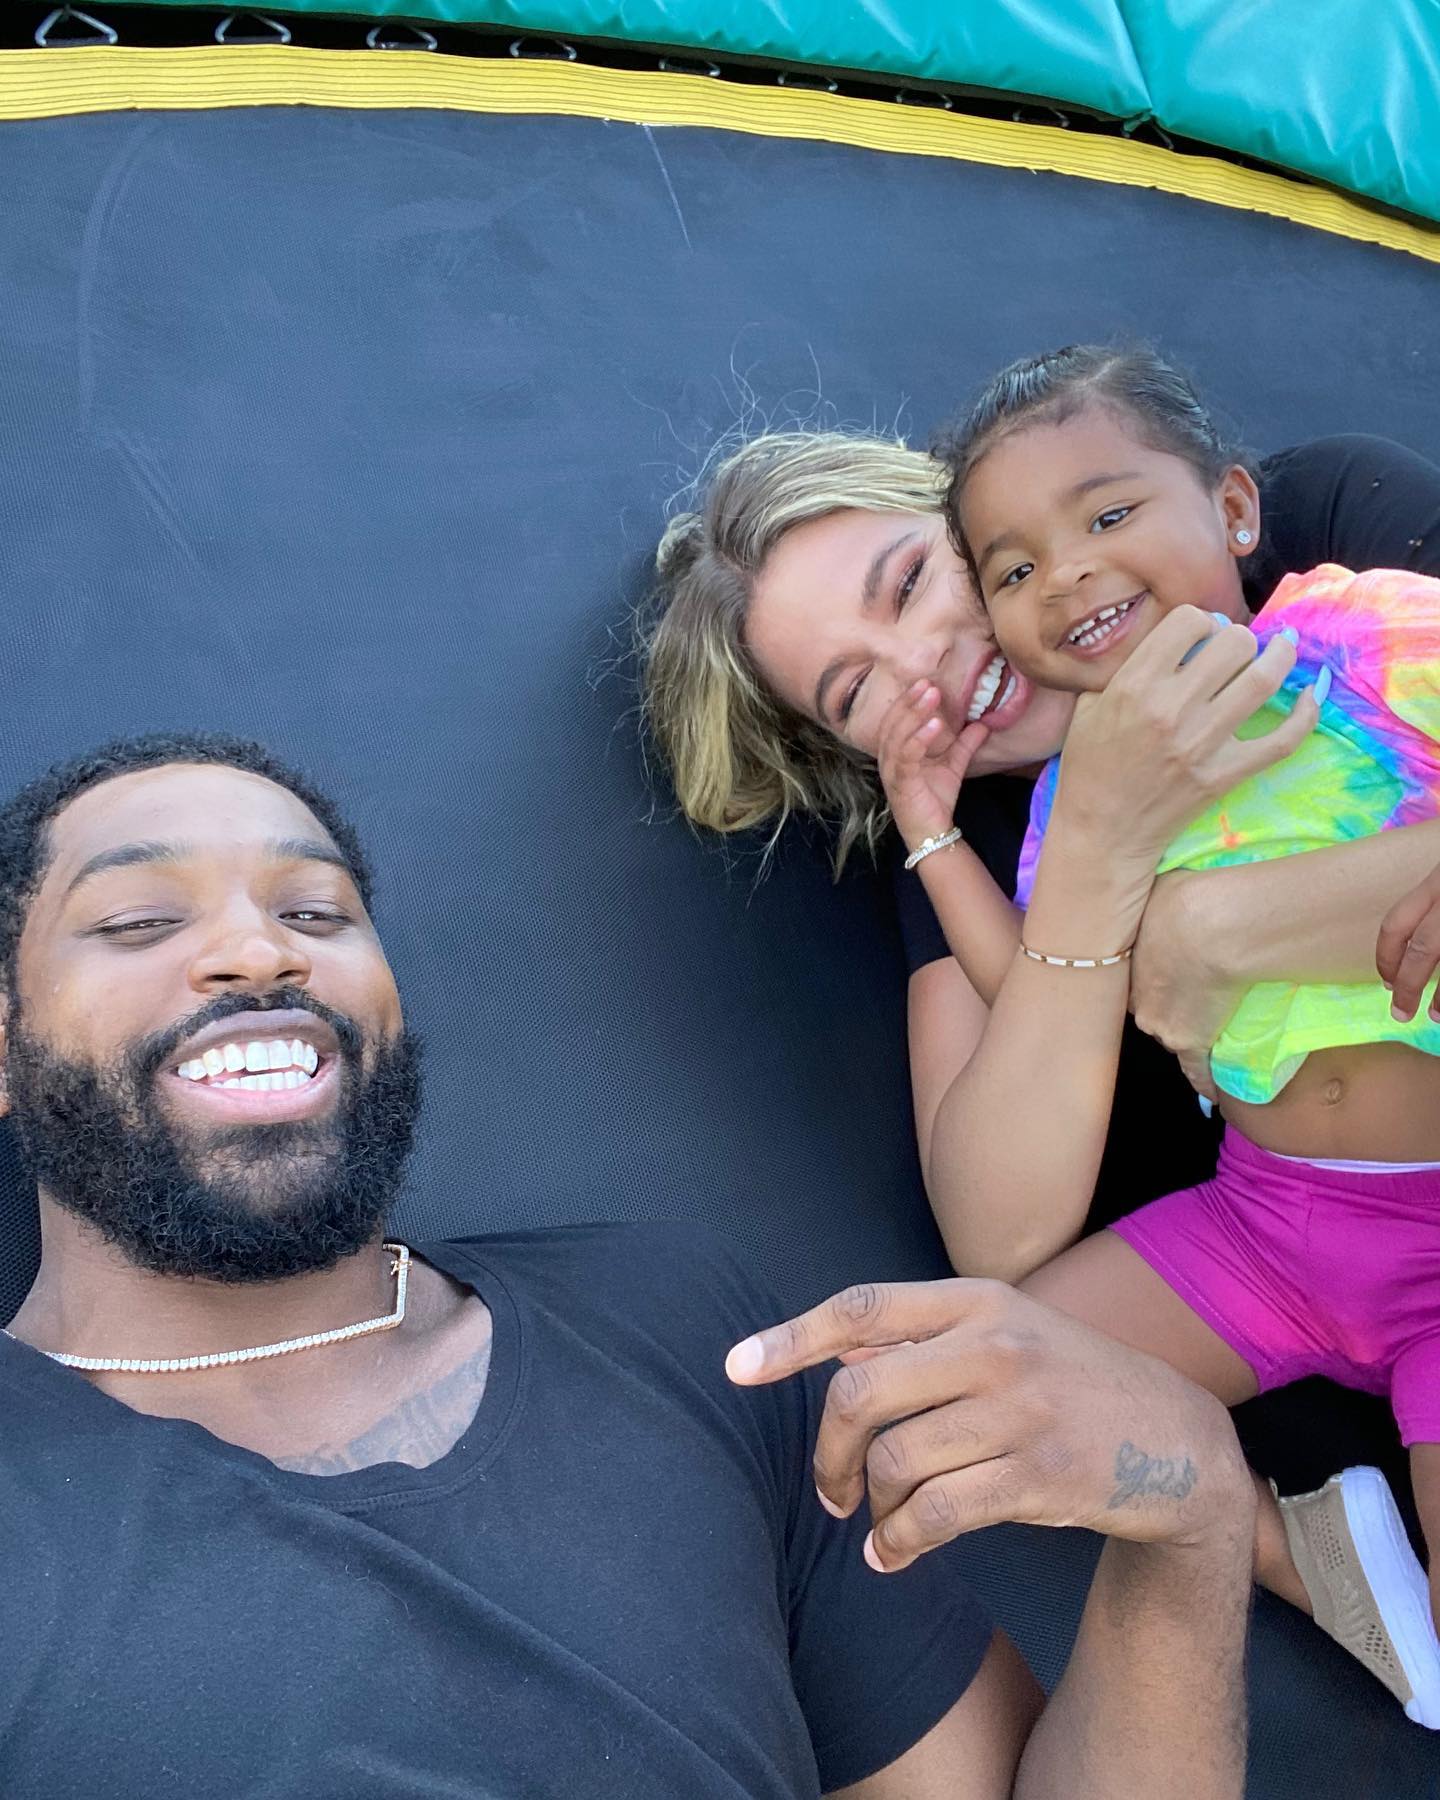 Khloe and Tristan have two children together. They welcomed True in 2018